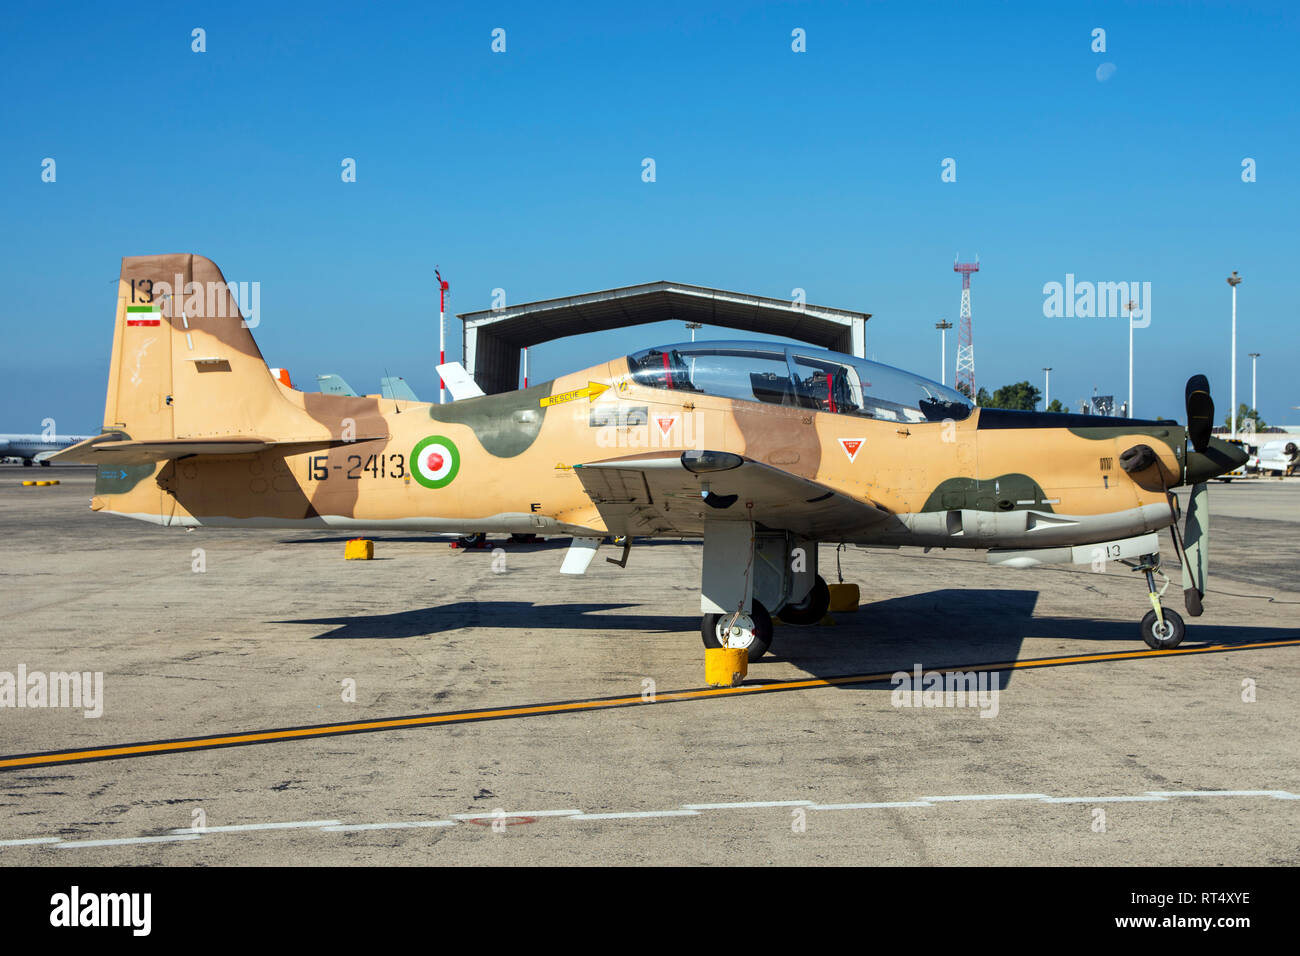 Tucano People High Resolution Stock Photography and Images - Alamy